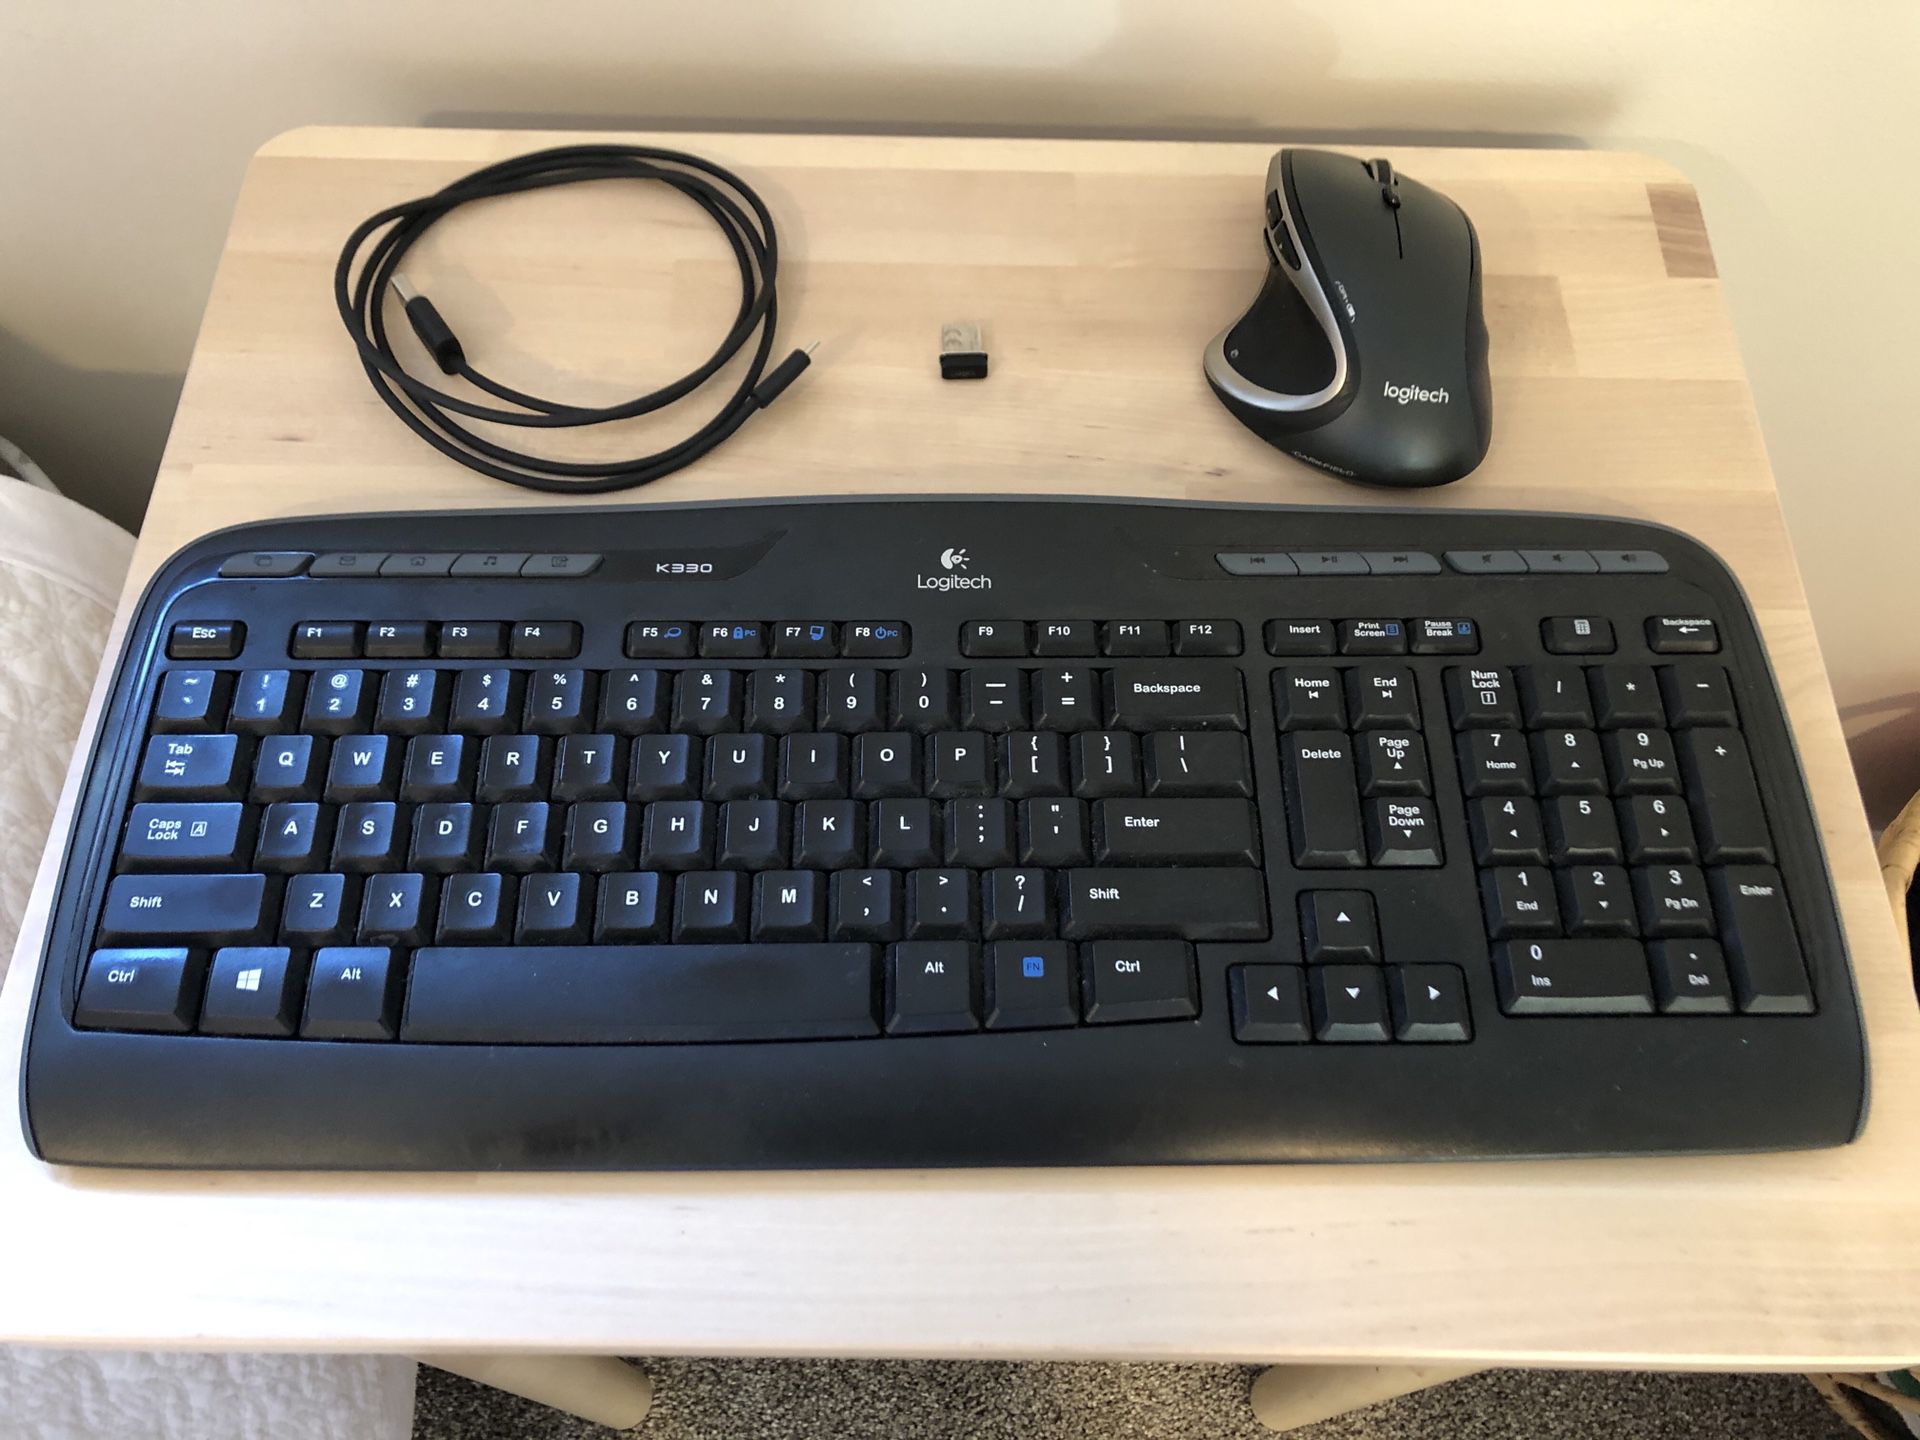 Wireless Keyboard and mouse